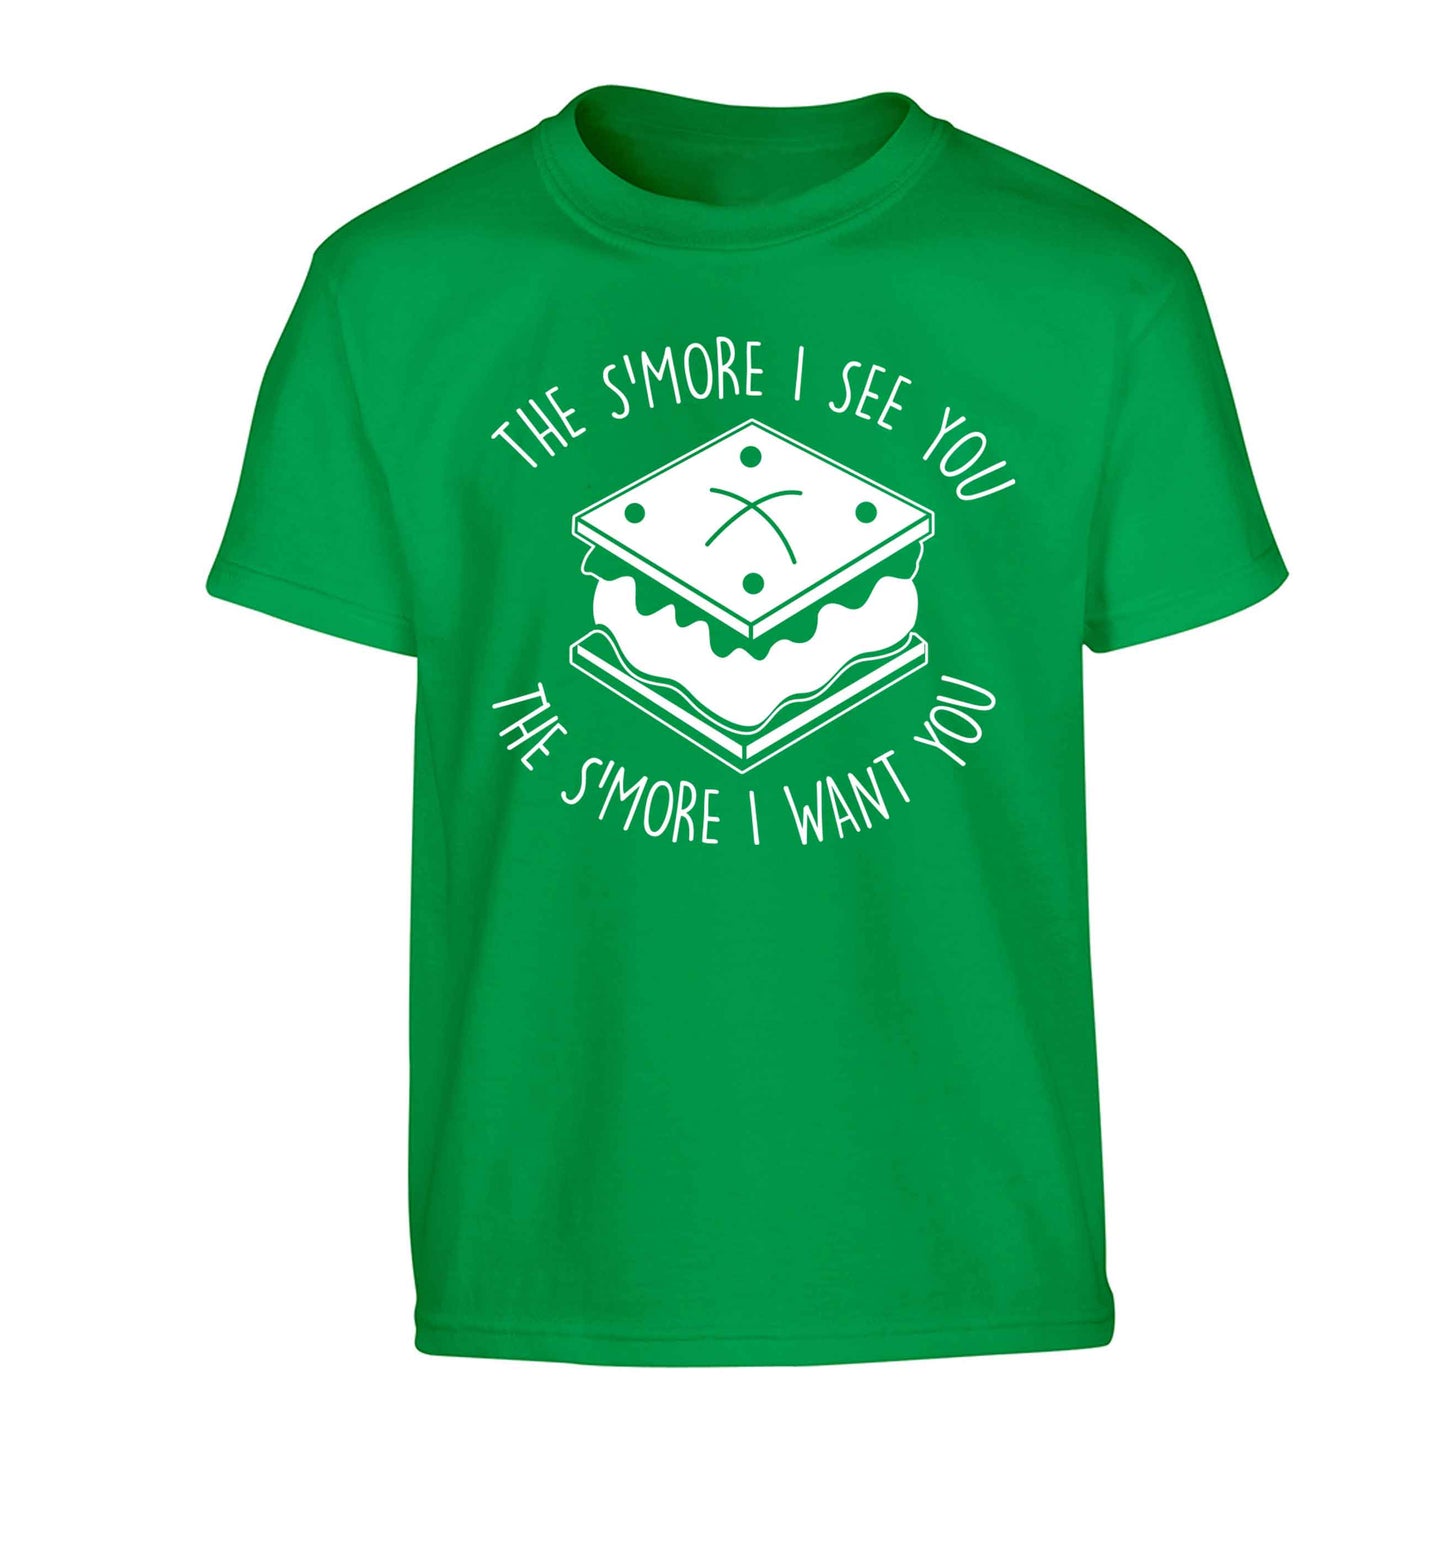 The s'more I see you the s'more I want you Children's green Tshirt 12-13 Years